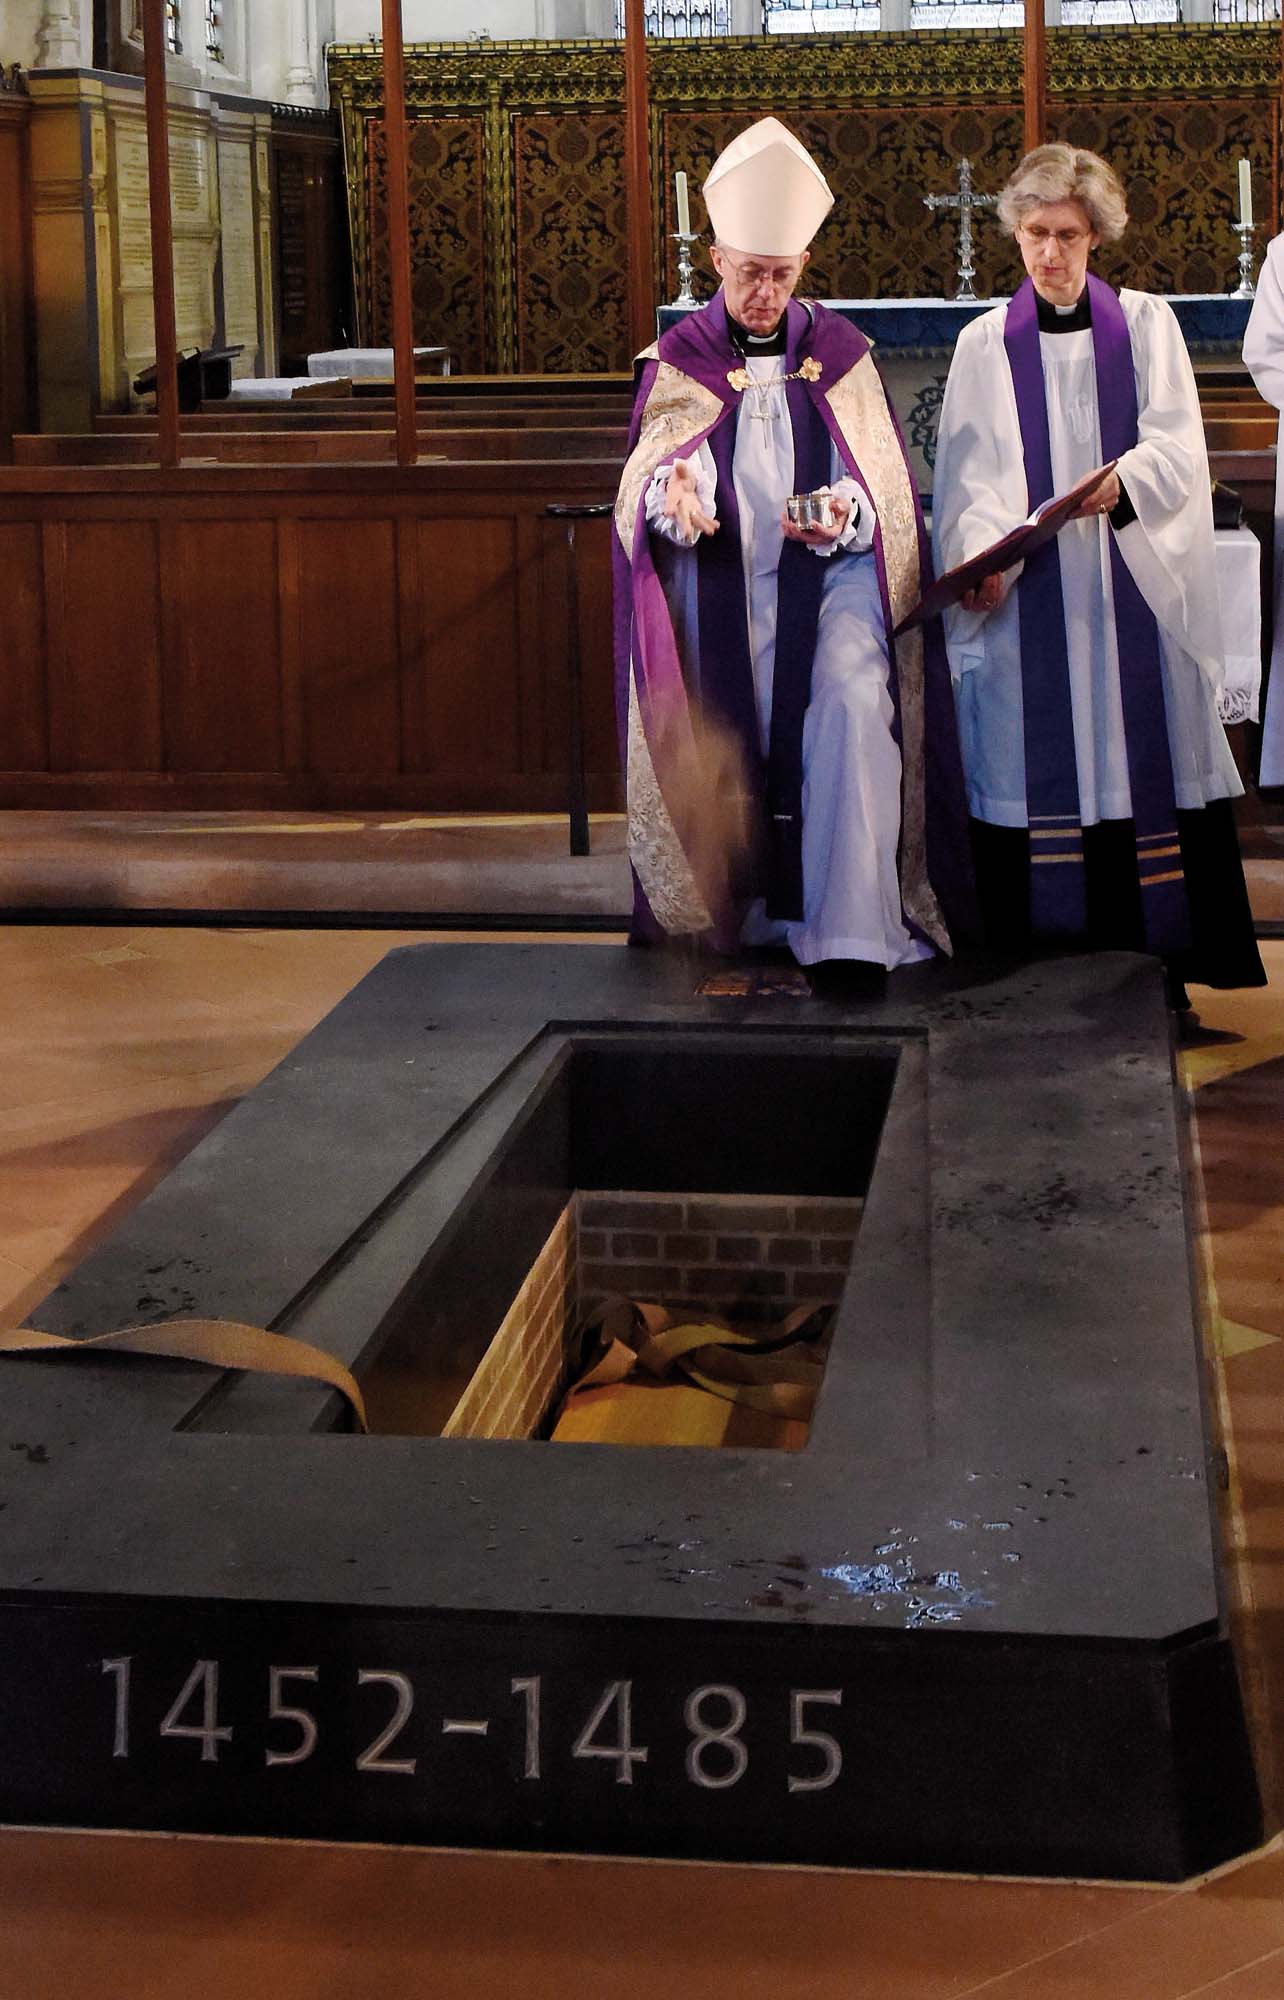 “Earth to earth”, the Archbishop of Canterbury buries King Richard III - Leicester Cathedral